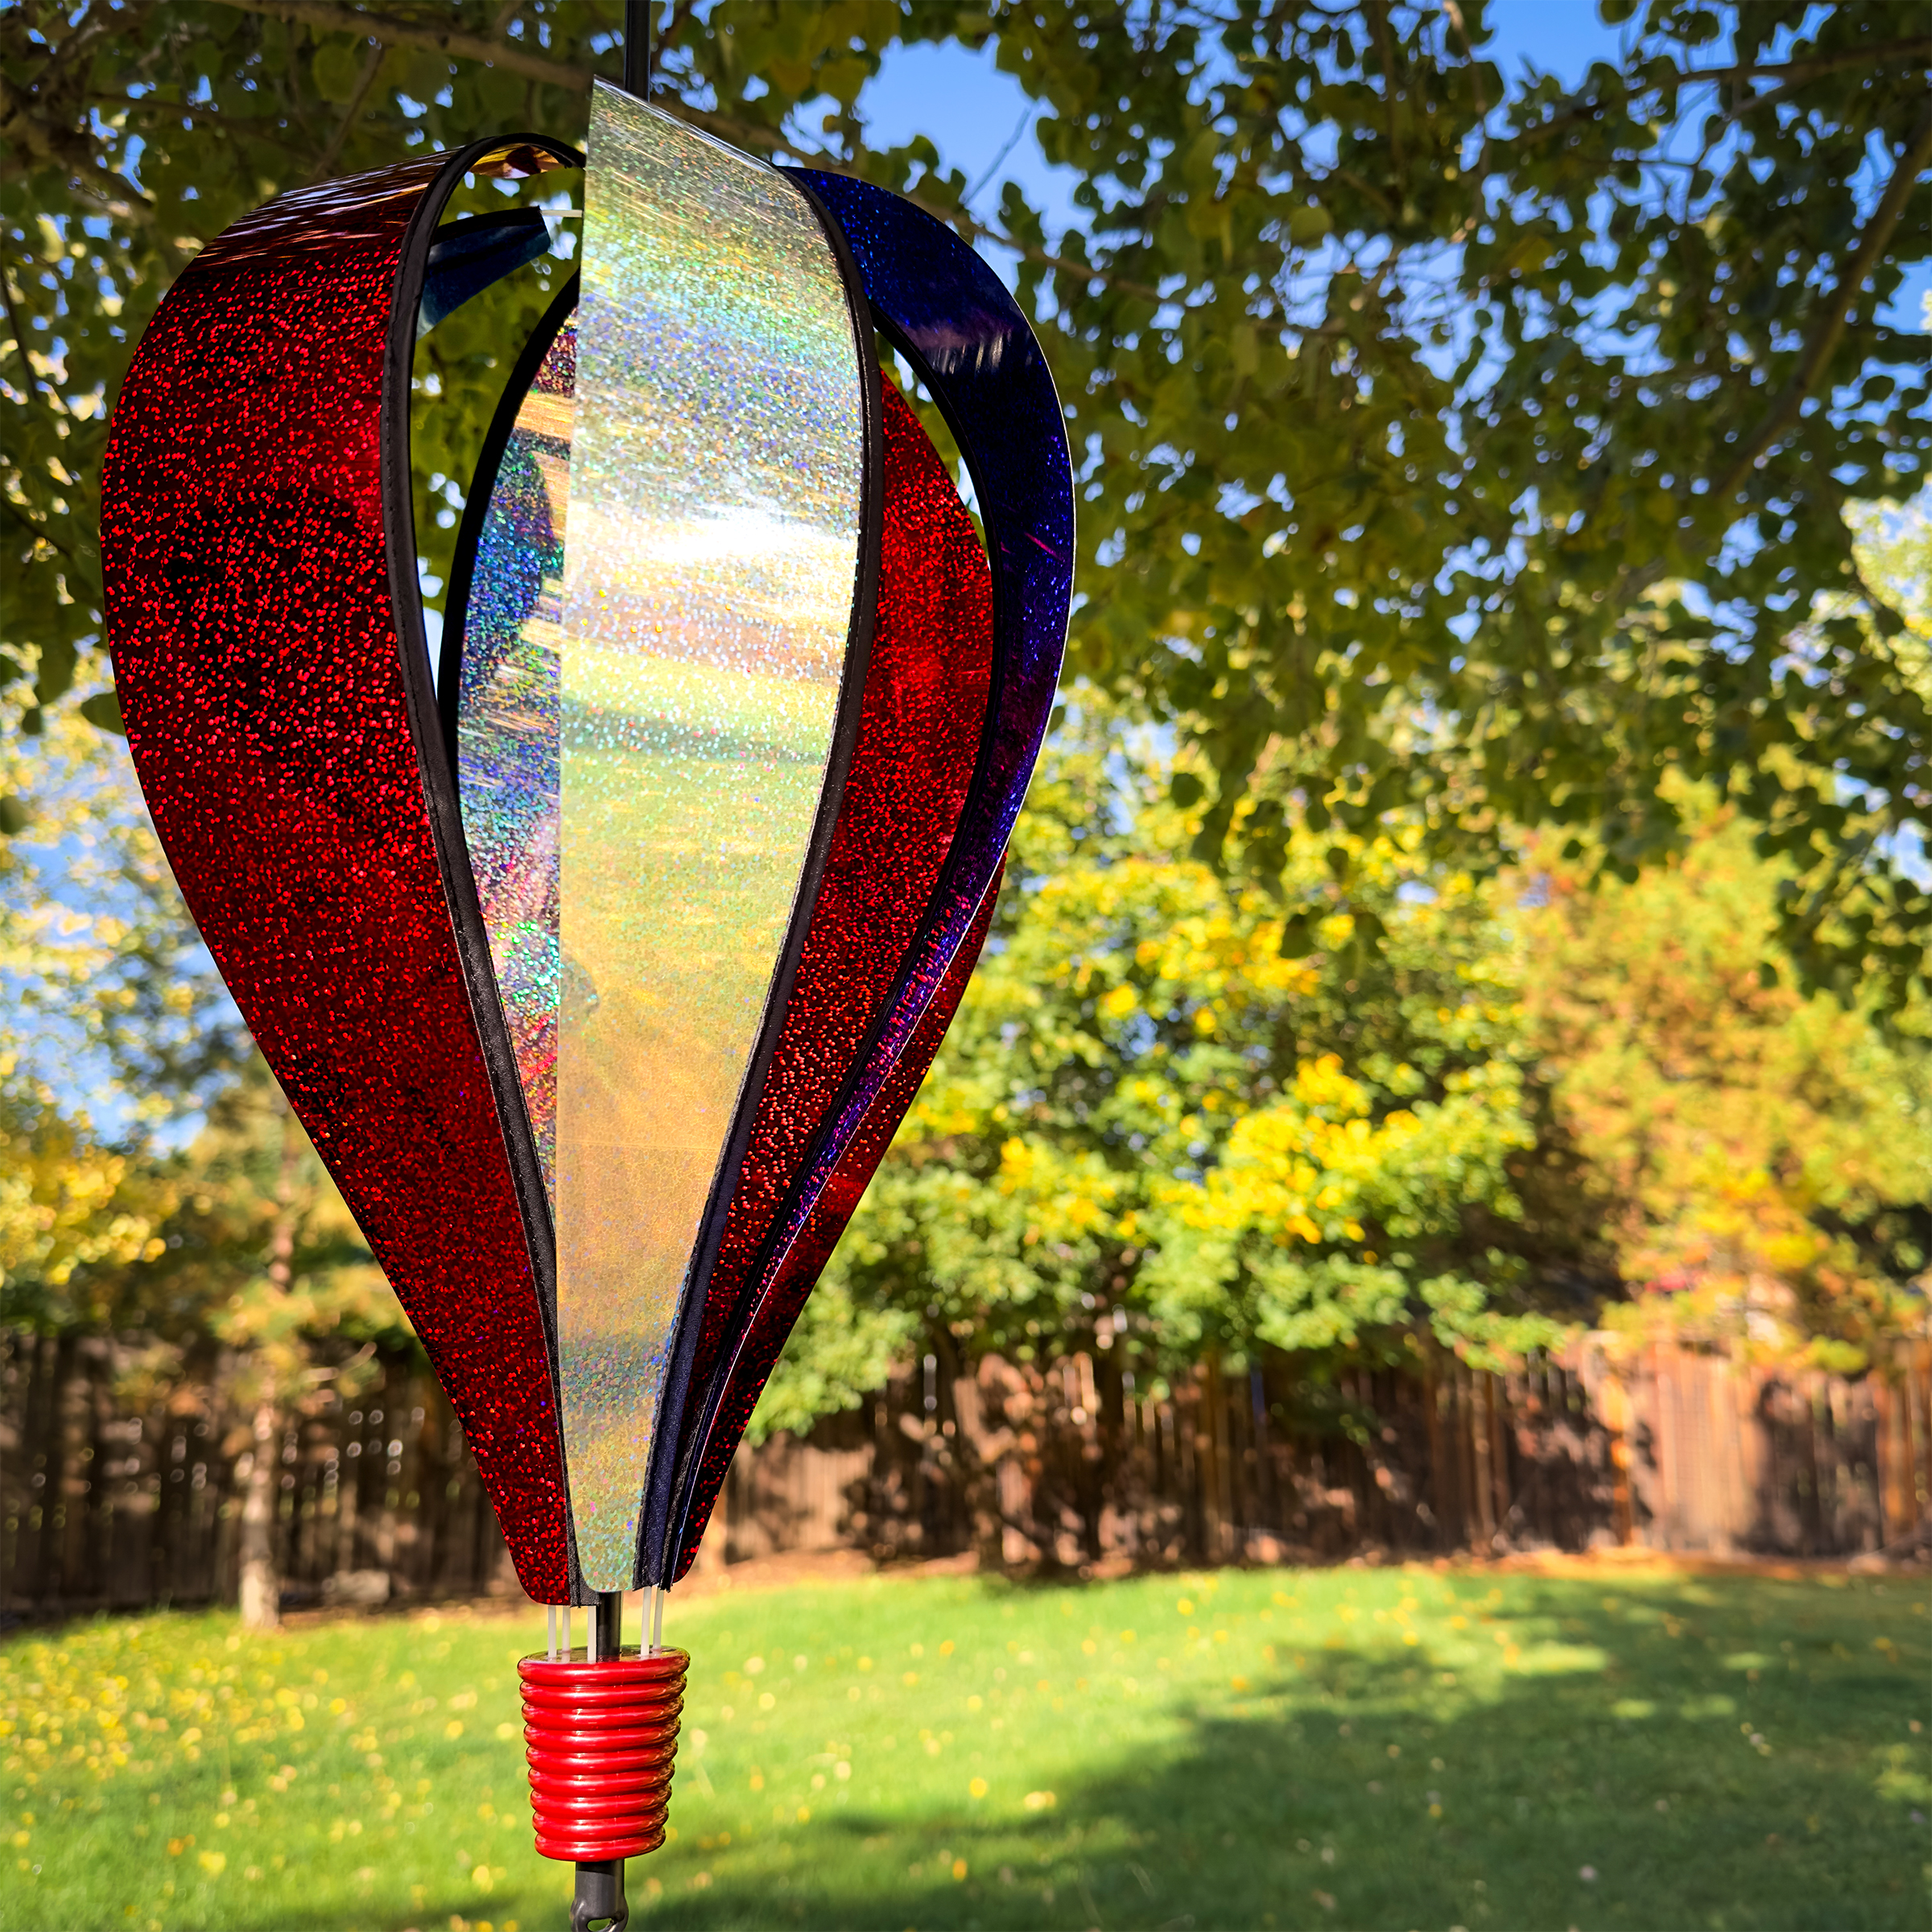 In the Breeze 1084 — Patriot Sparkler 6 Panel Hot Air Balloon 12"W x 18"H x 12"D, Colorful Mylar Patriotic Garden Spinner - image 2 of 4